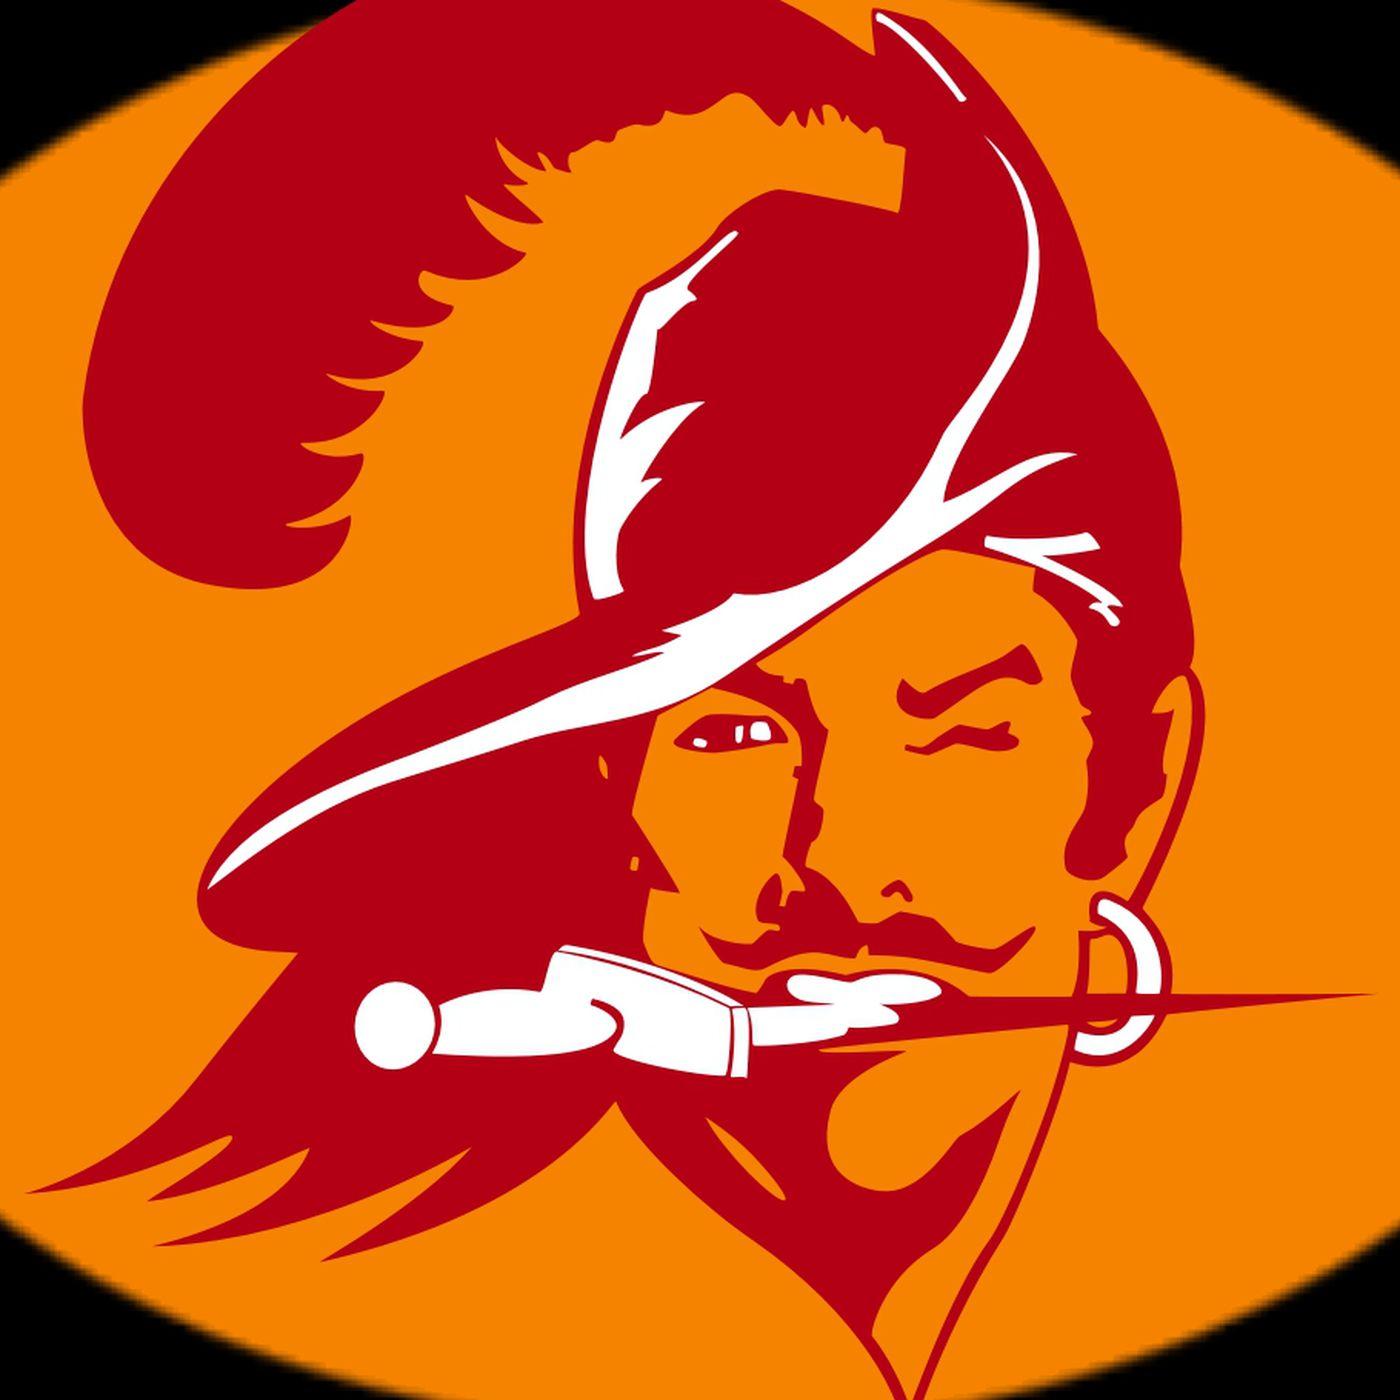 Tampa Bay Buccaneers Logo - The three gayest logos in NFL history - Outsports